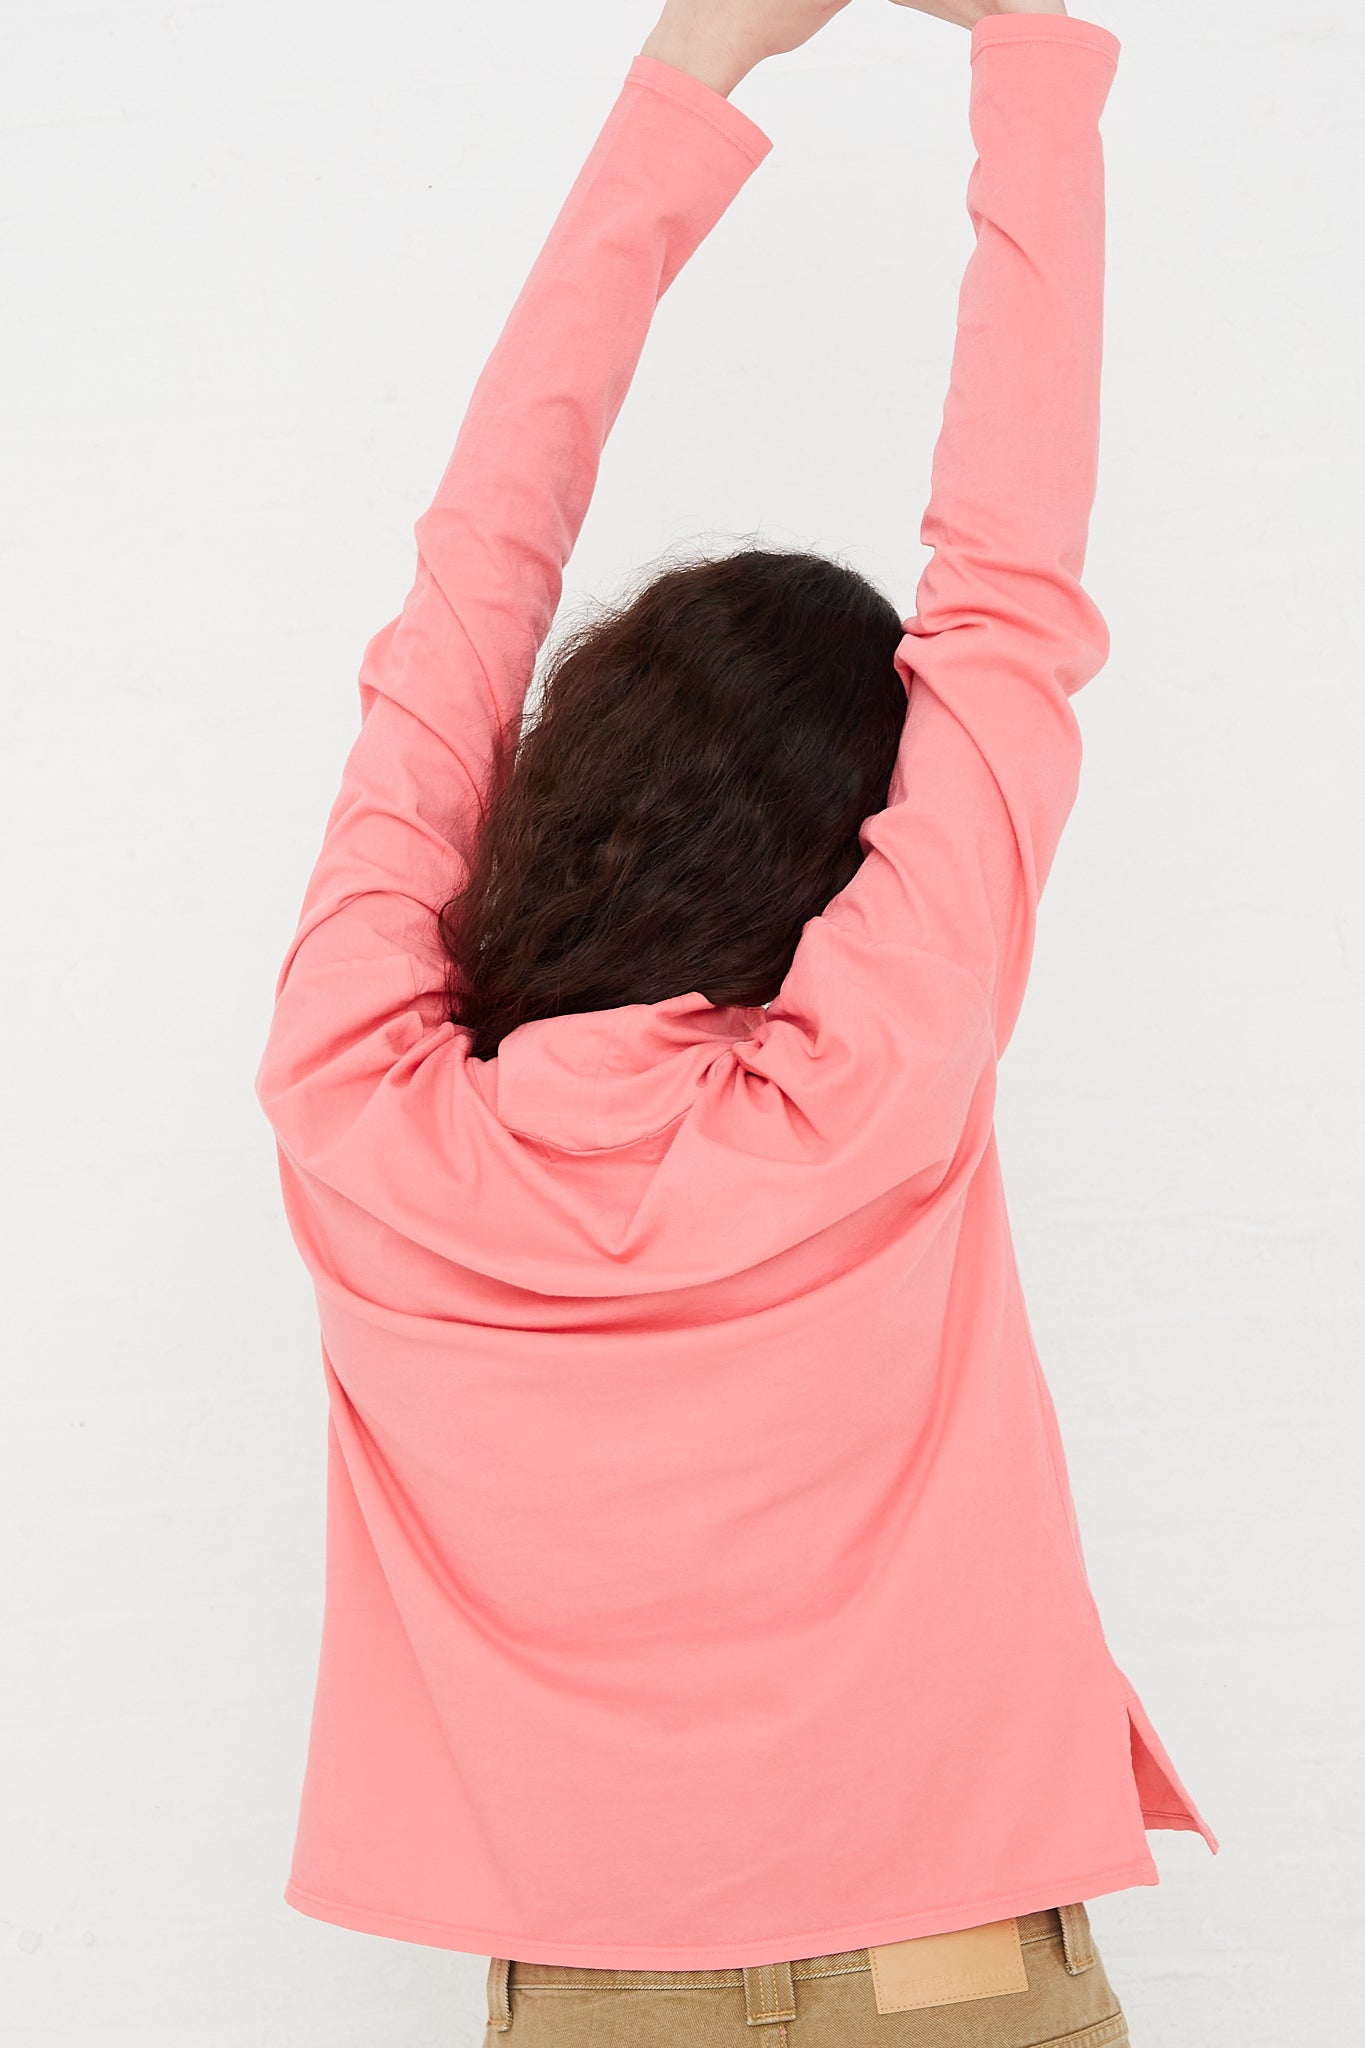 A model wearing a B Sides Cotton Turtleneck Shirt in Calla Pink with her arms outstretched.